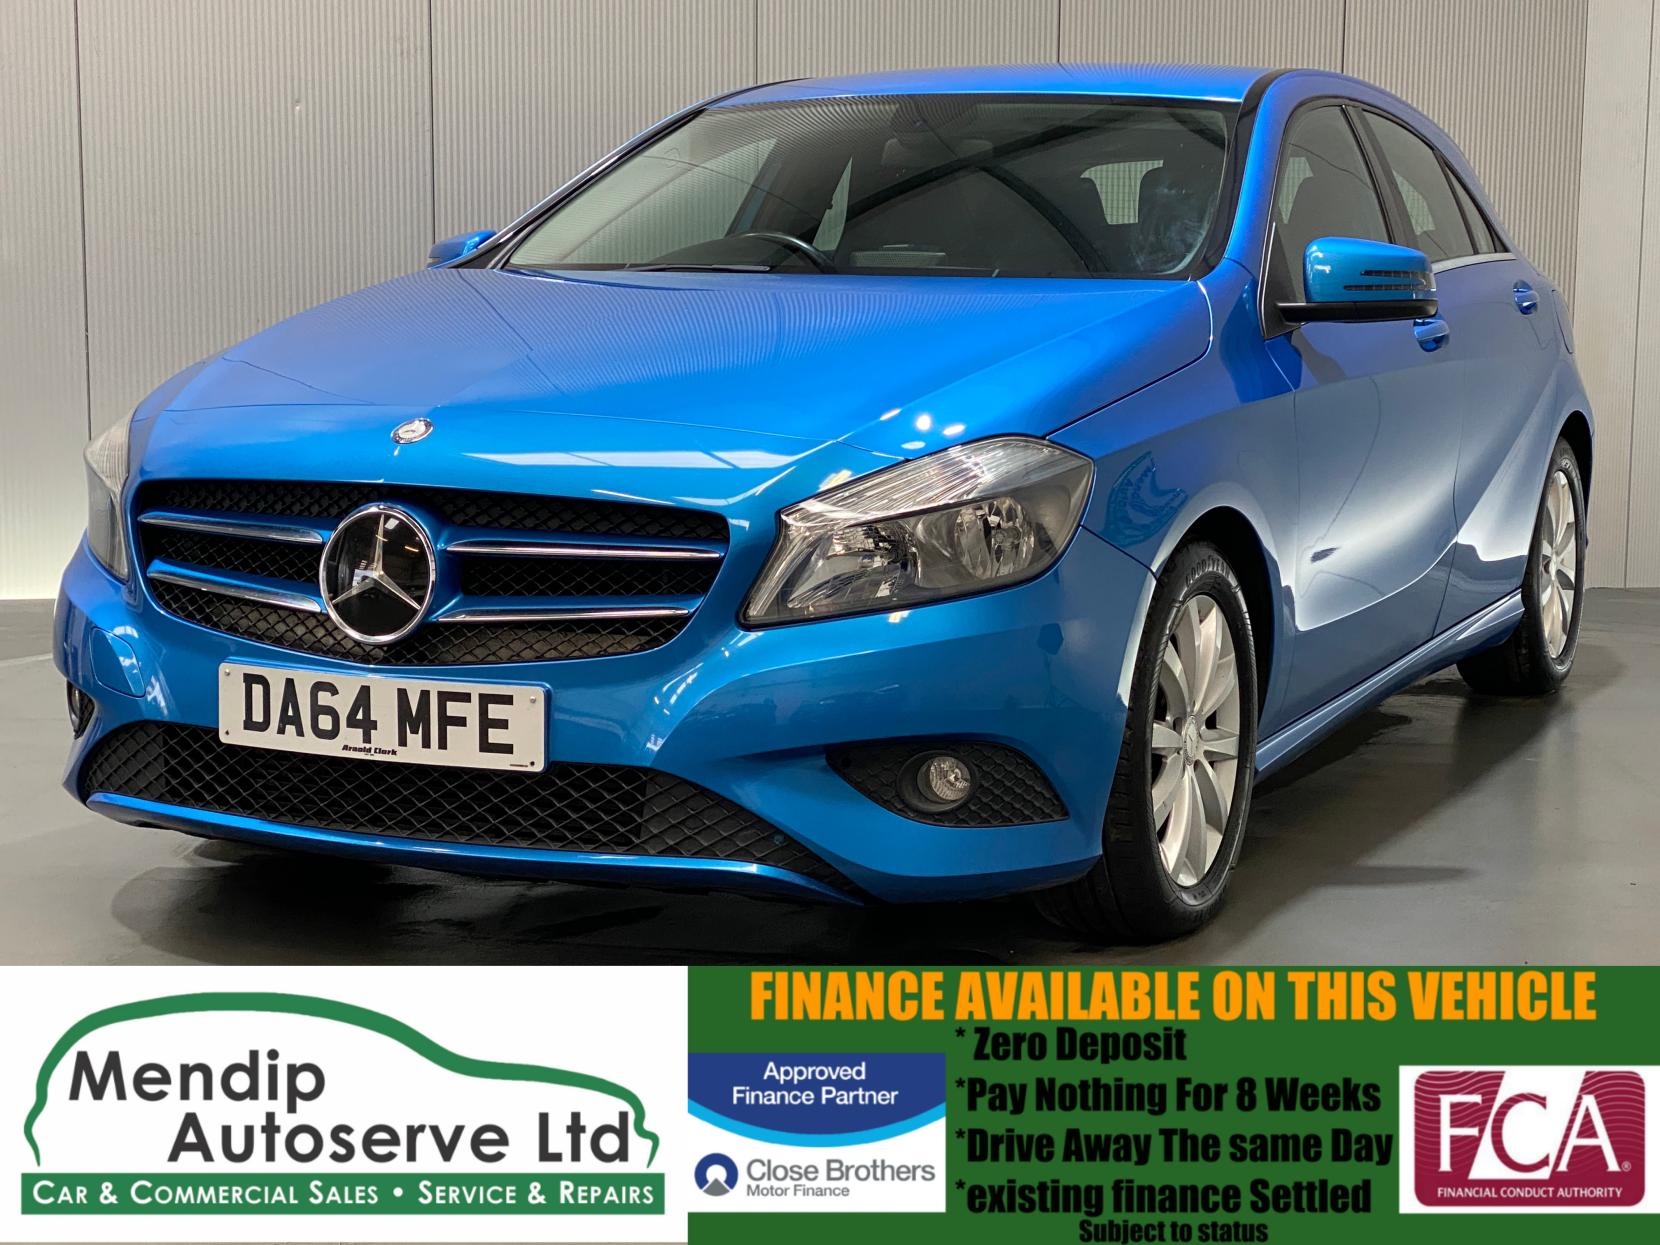 Mercedes-Benz A Class 1.5 A180 CDI ECO SE Hatchback 5dr Diesel Manual Euro 5 (s/s) (109 ps)